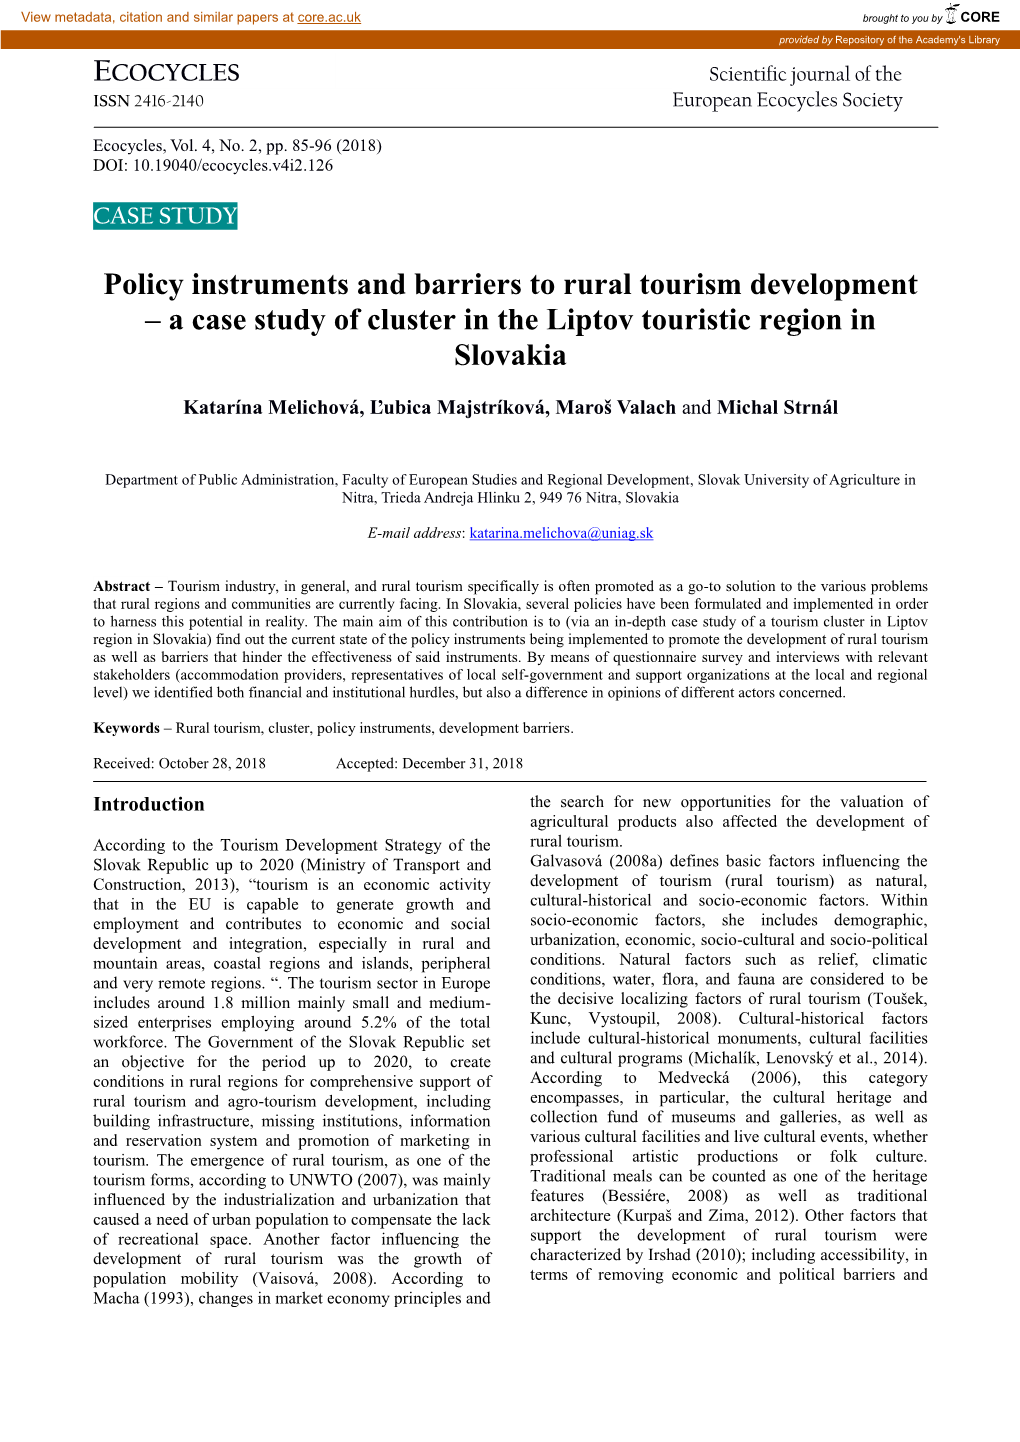 Policy Instruments and Barriers to Rural Tourism Development – a Case Study of Cluster in the Liptov Touristic Region in Slovakia